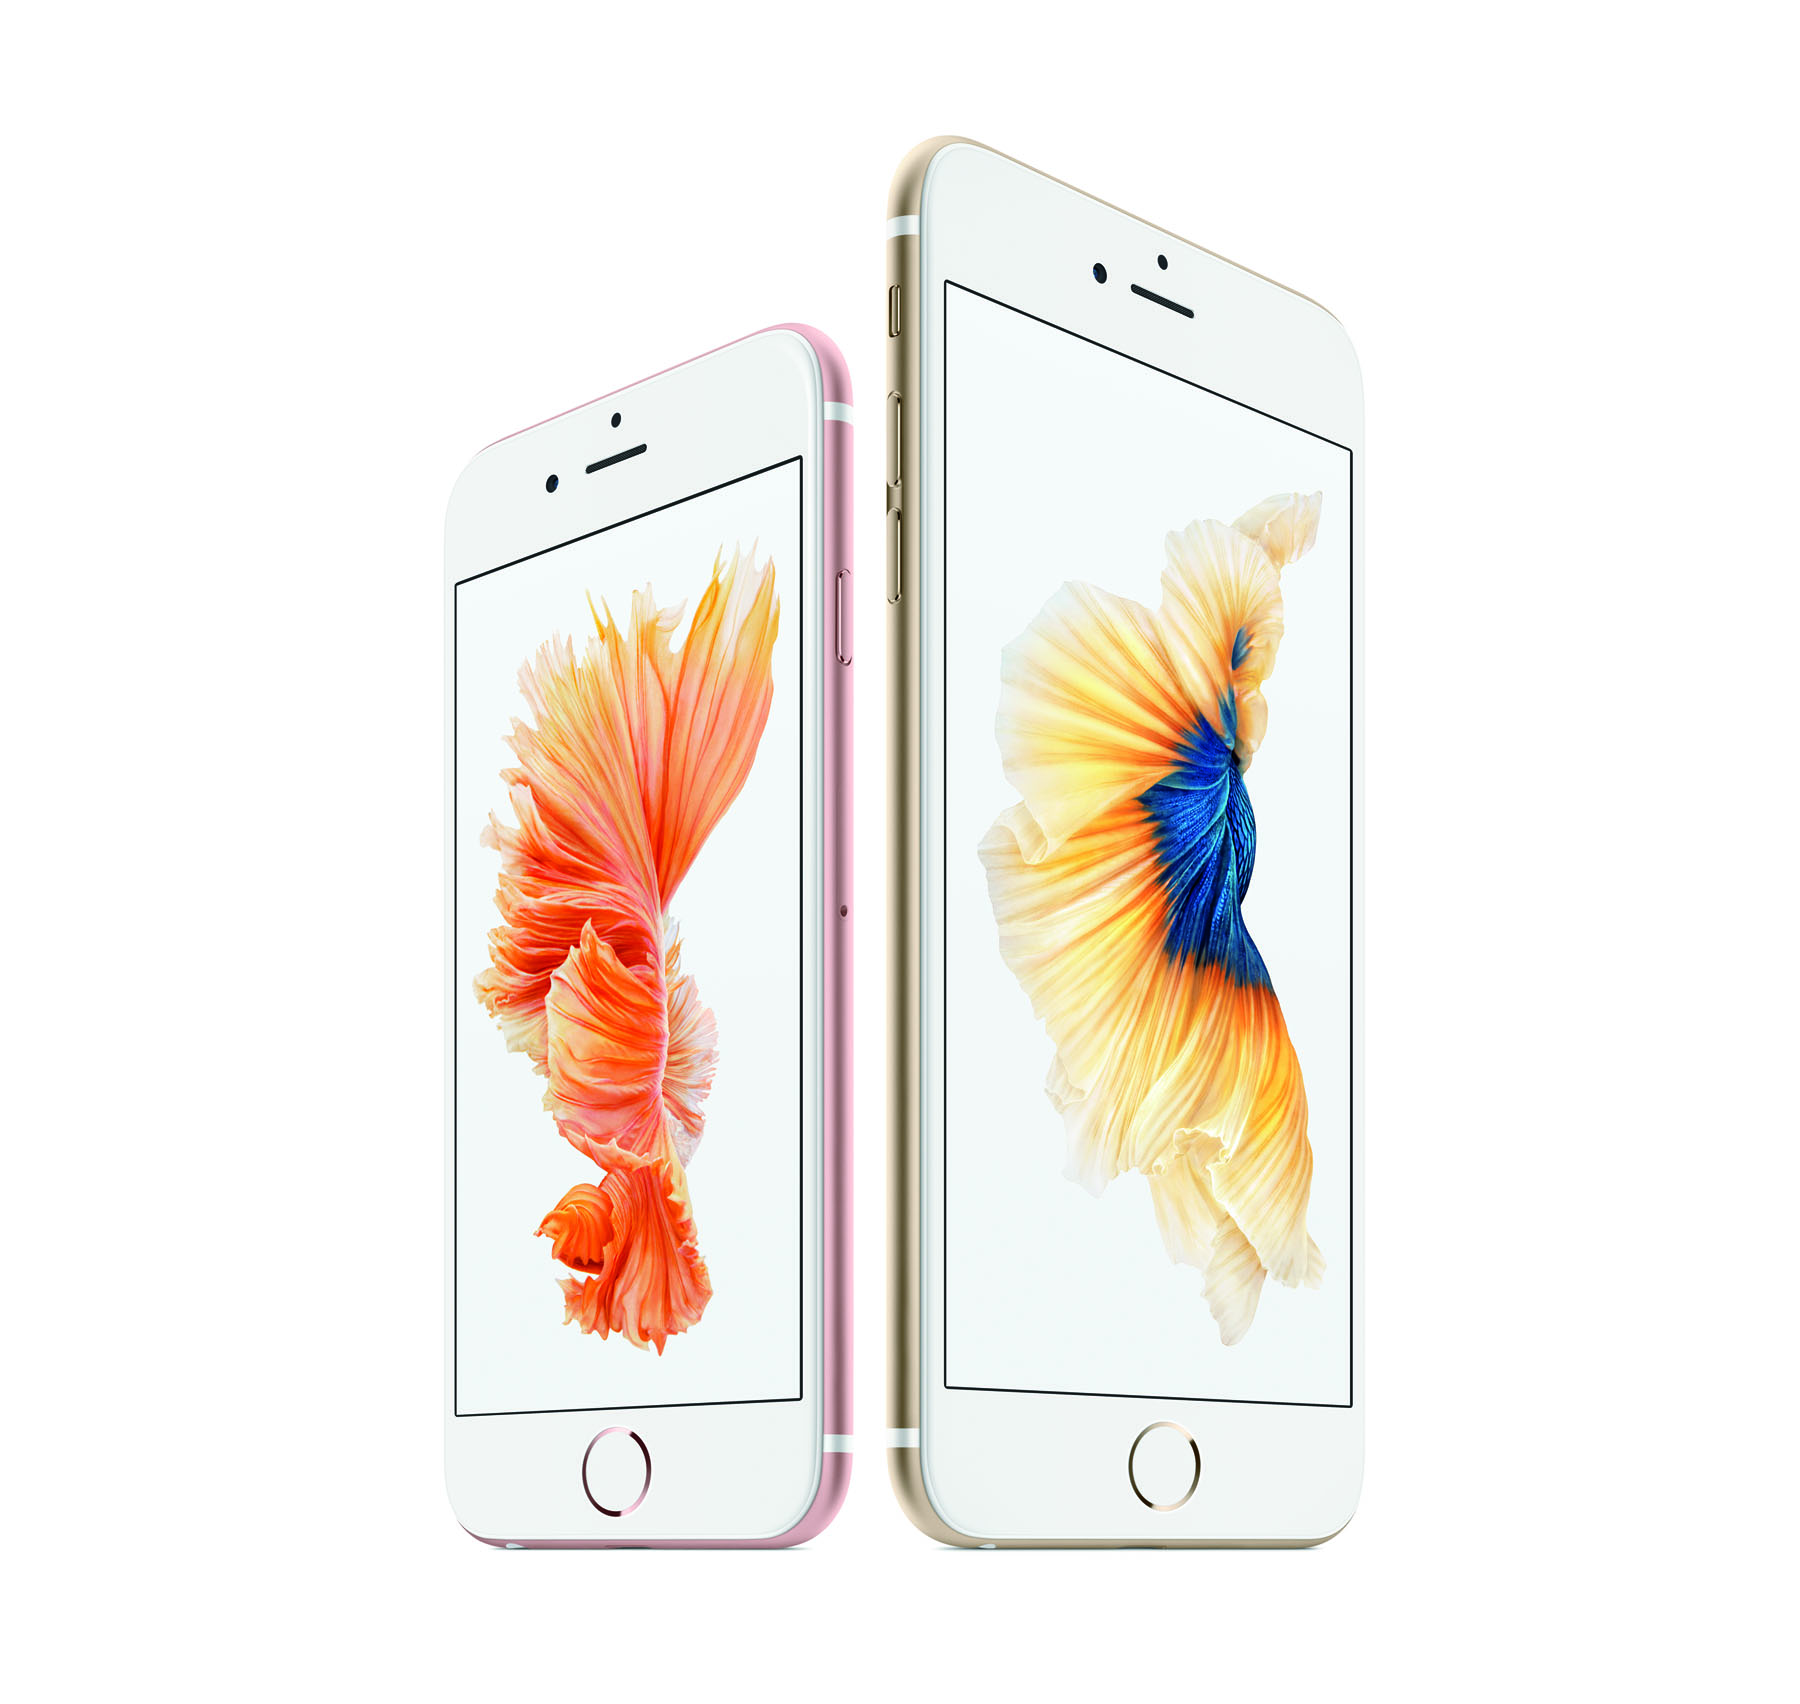 Apple reduces the pricing for iPhone 6s, iPhone 6s Plus and iPhone SE